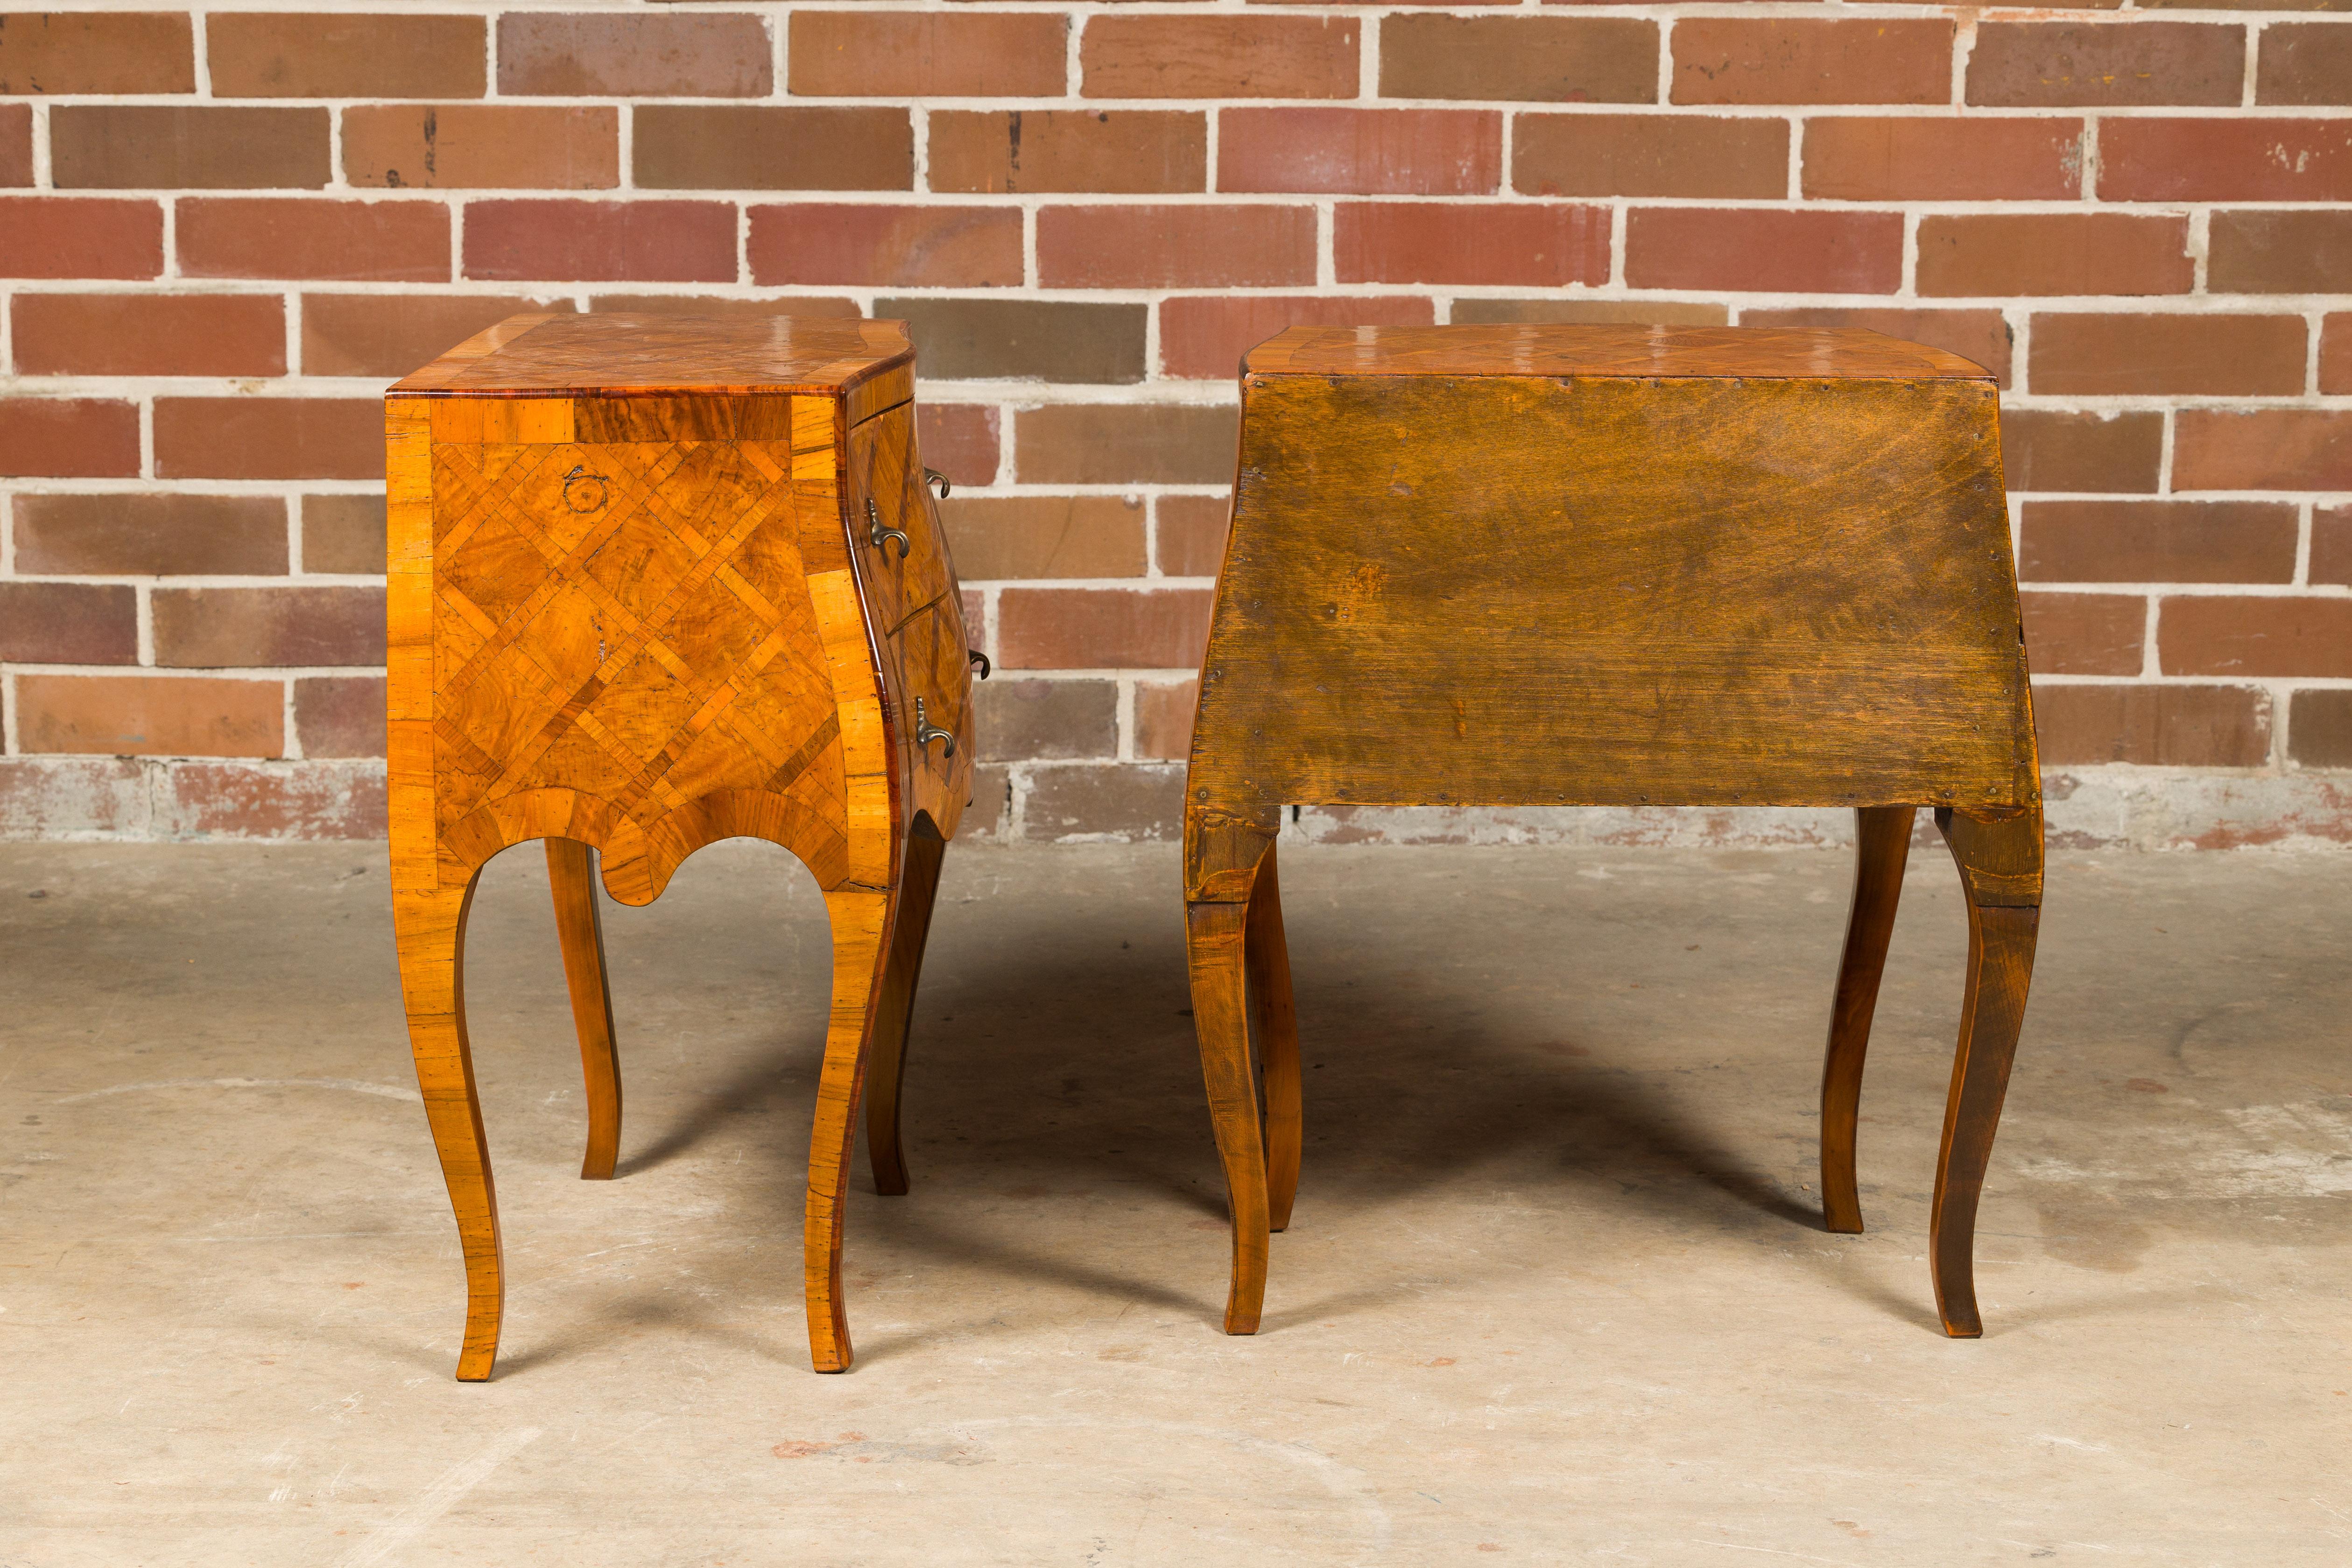 20th Century Italian Rococo Style Burl Wood Marquetry Bedside Chests with Cabriole Legs For Sale